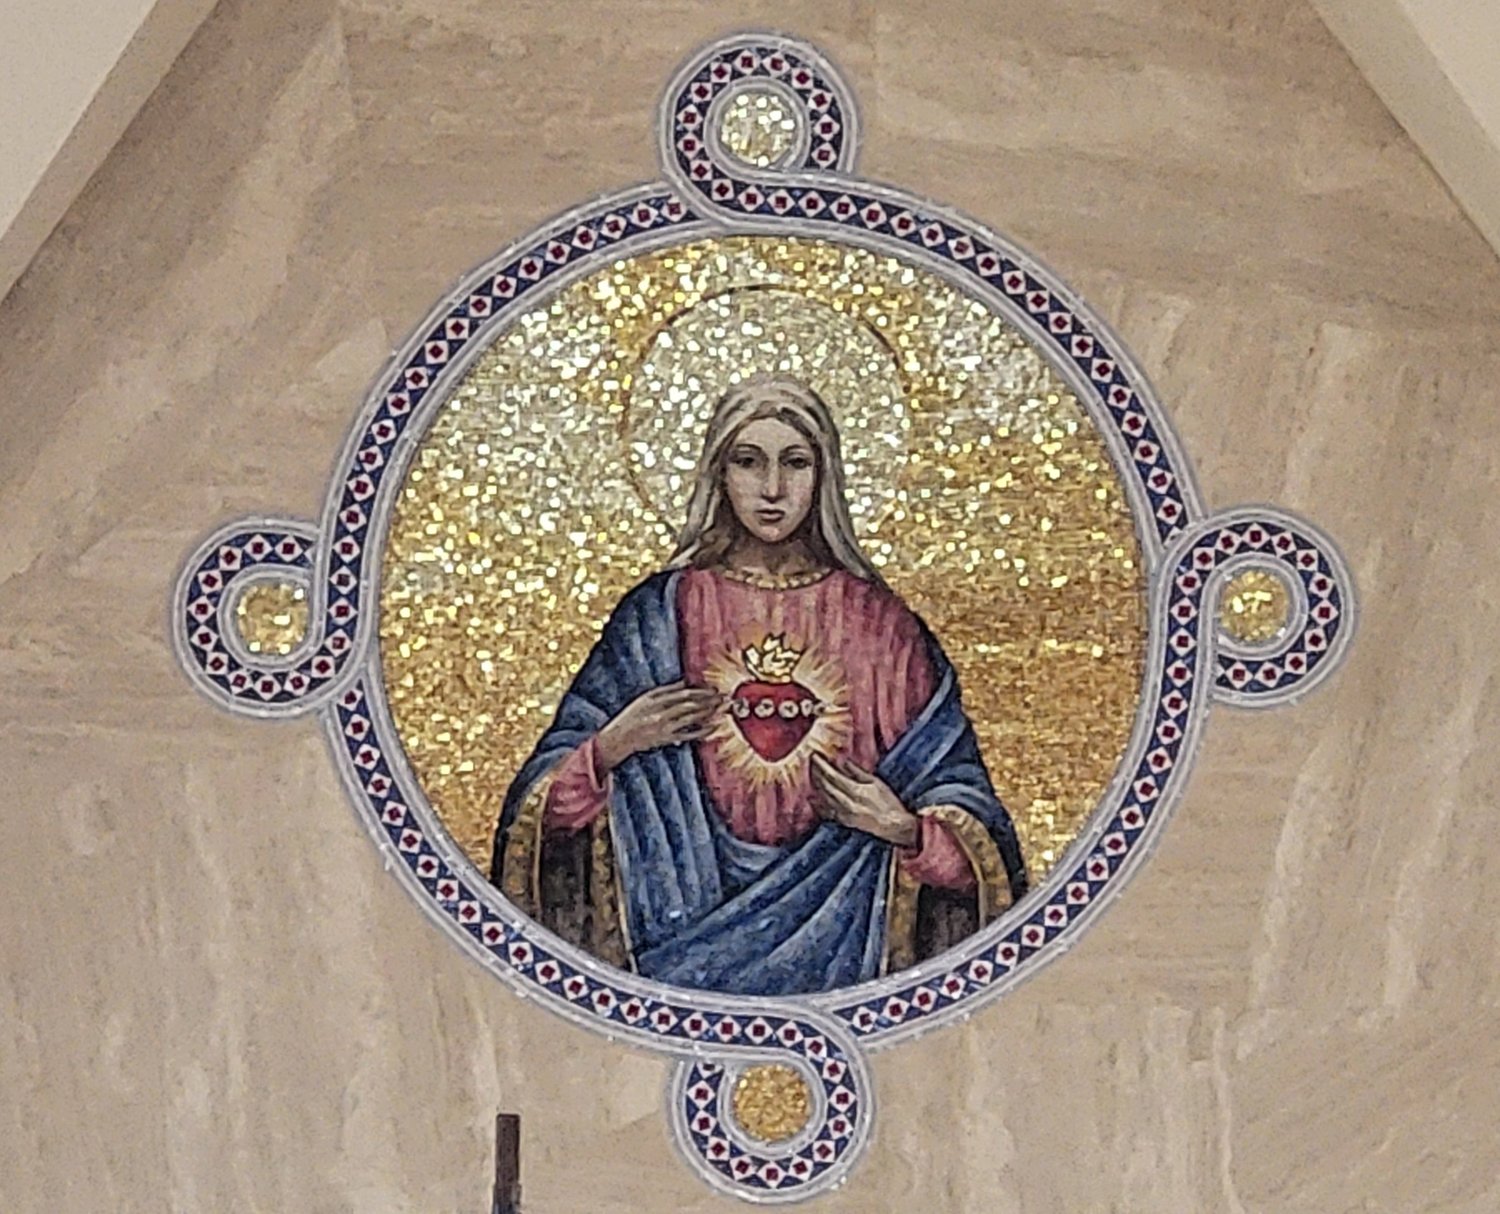 This radiant mosaic image of the Immaculate Heart of Mary adorns the travertine marble wall behind the sanctuary of the Cathedral.